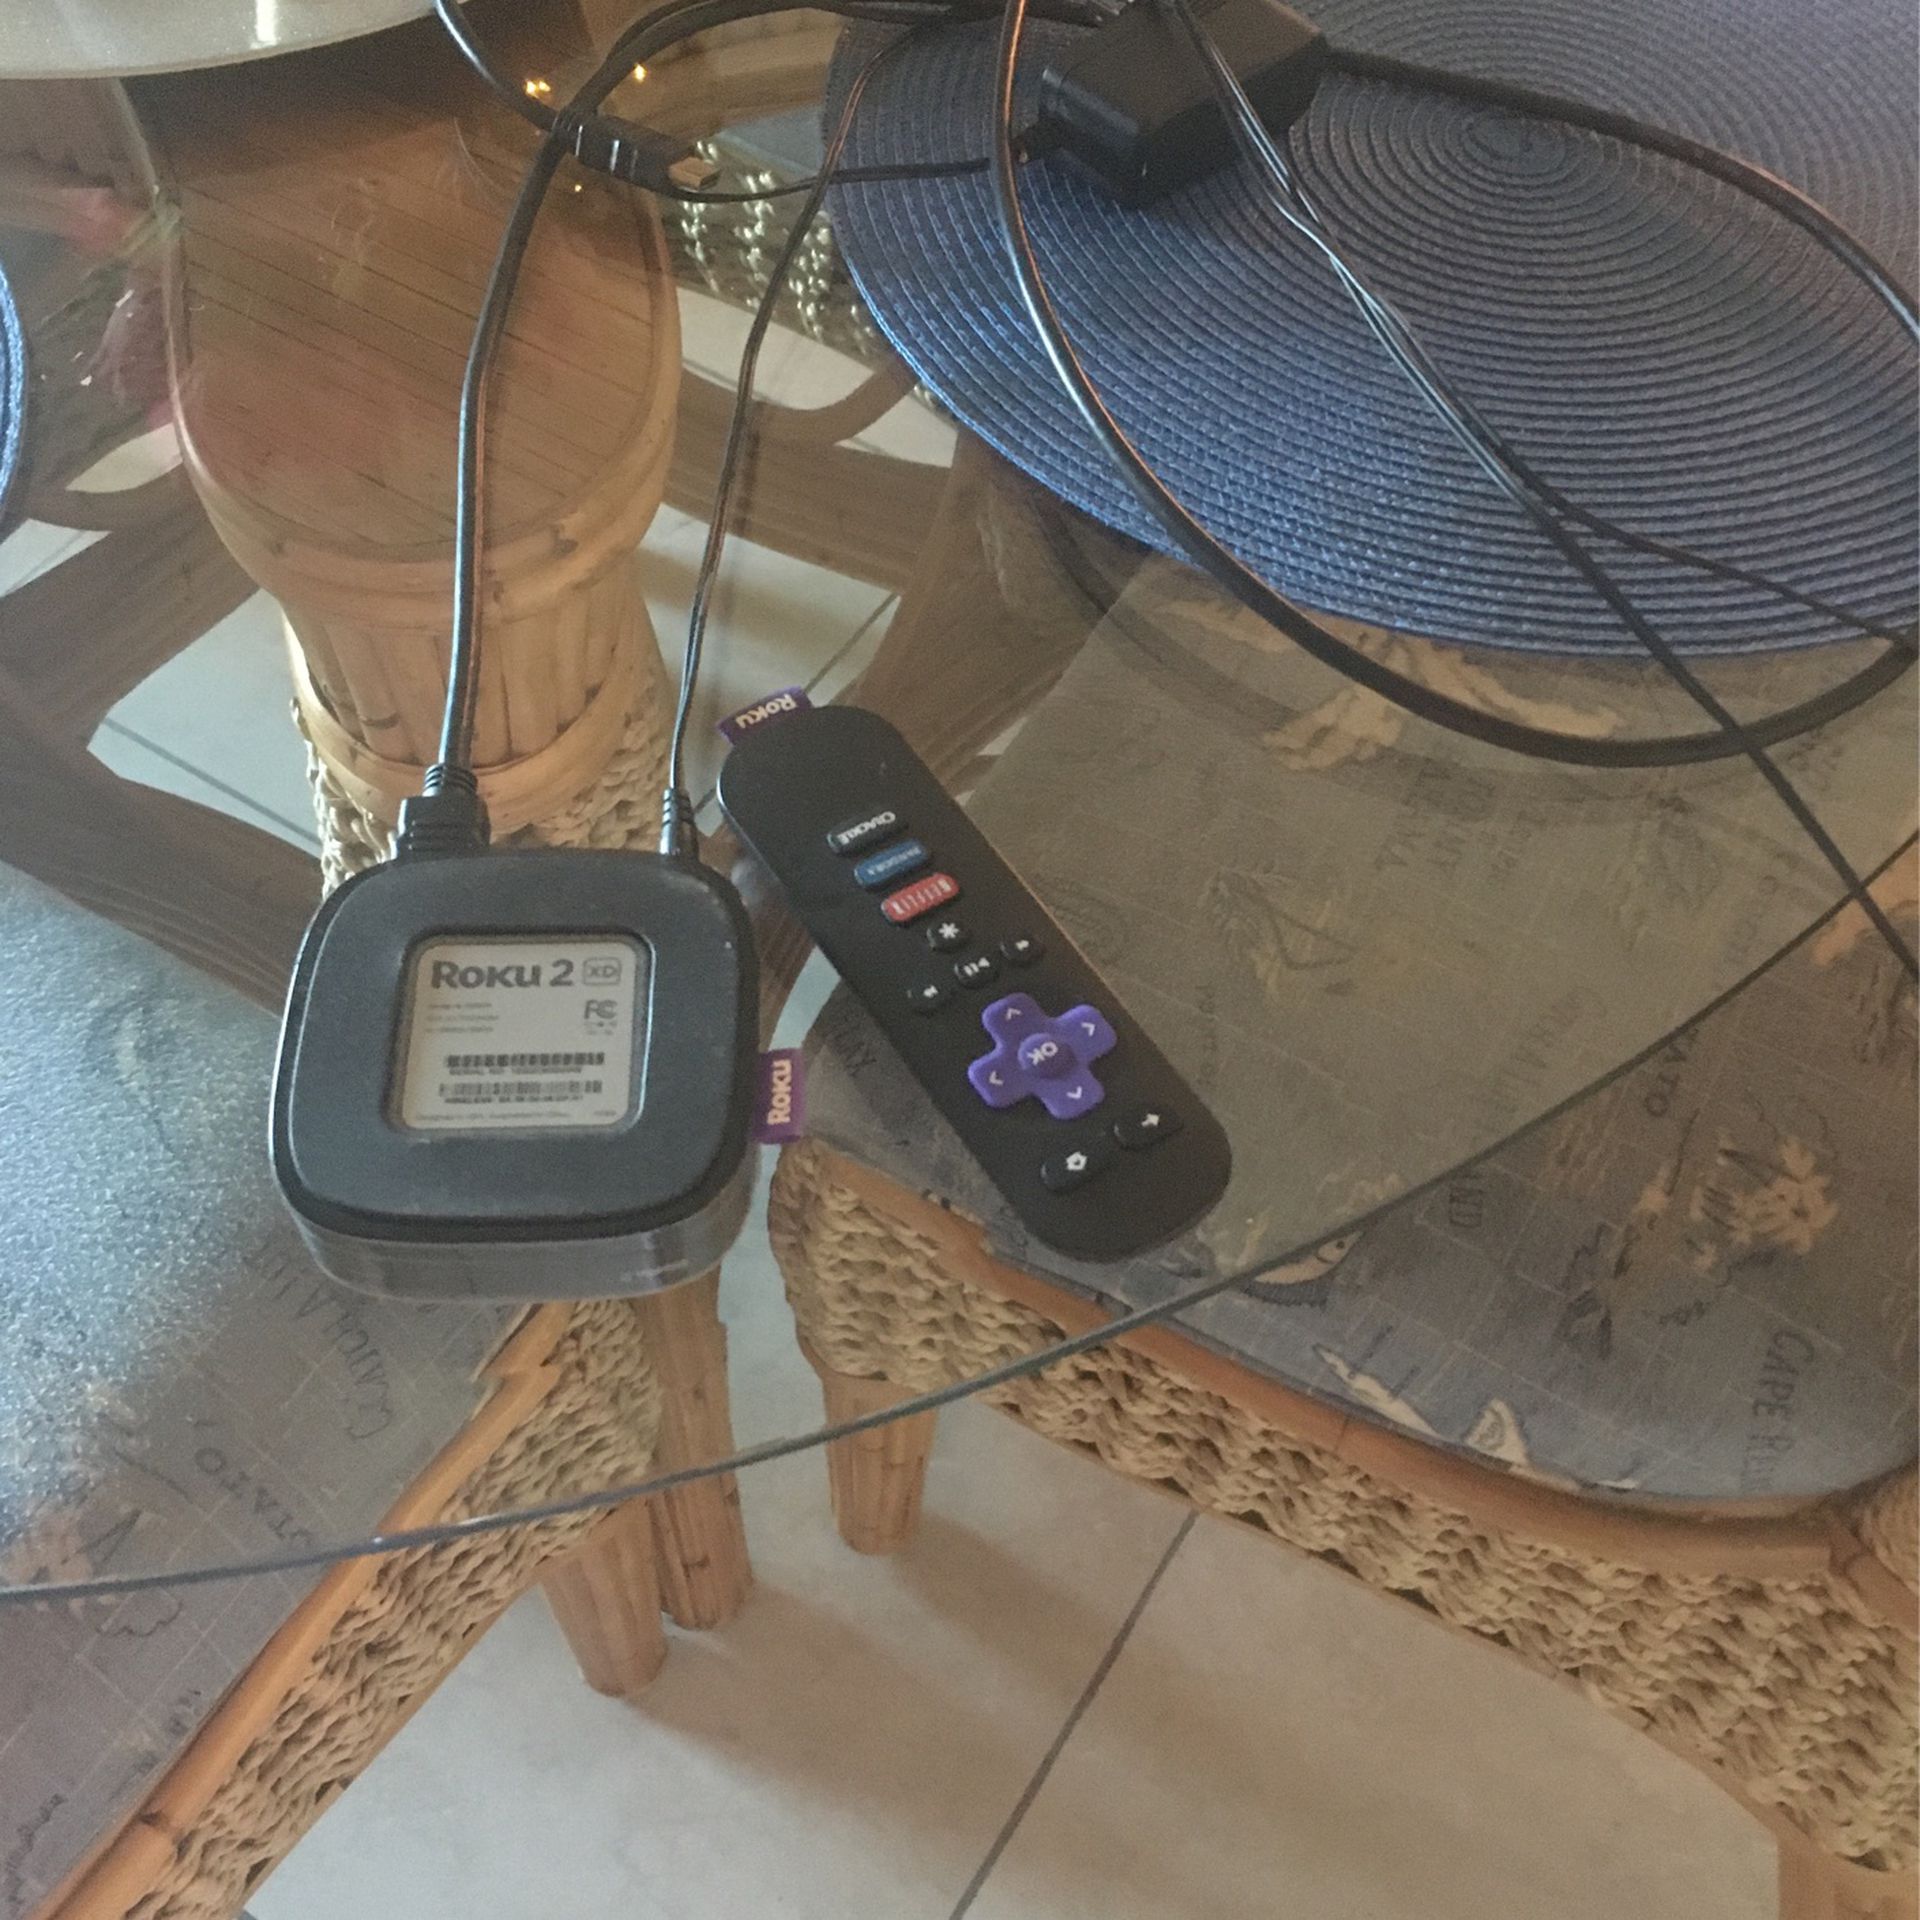 Roku 2 Box with remote and ready to plug into Tv cords